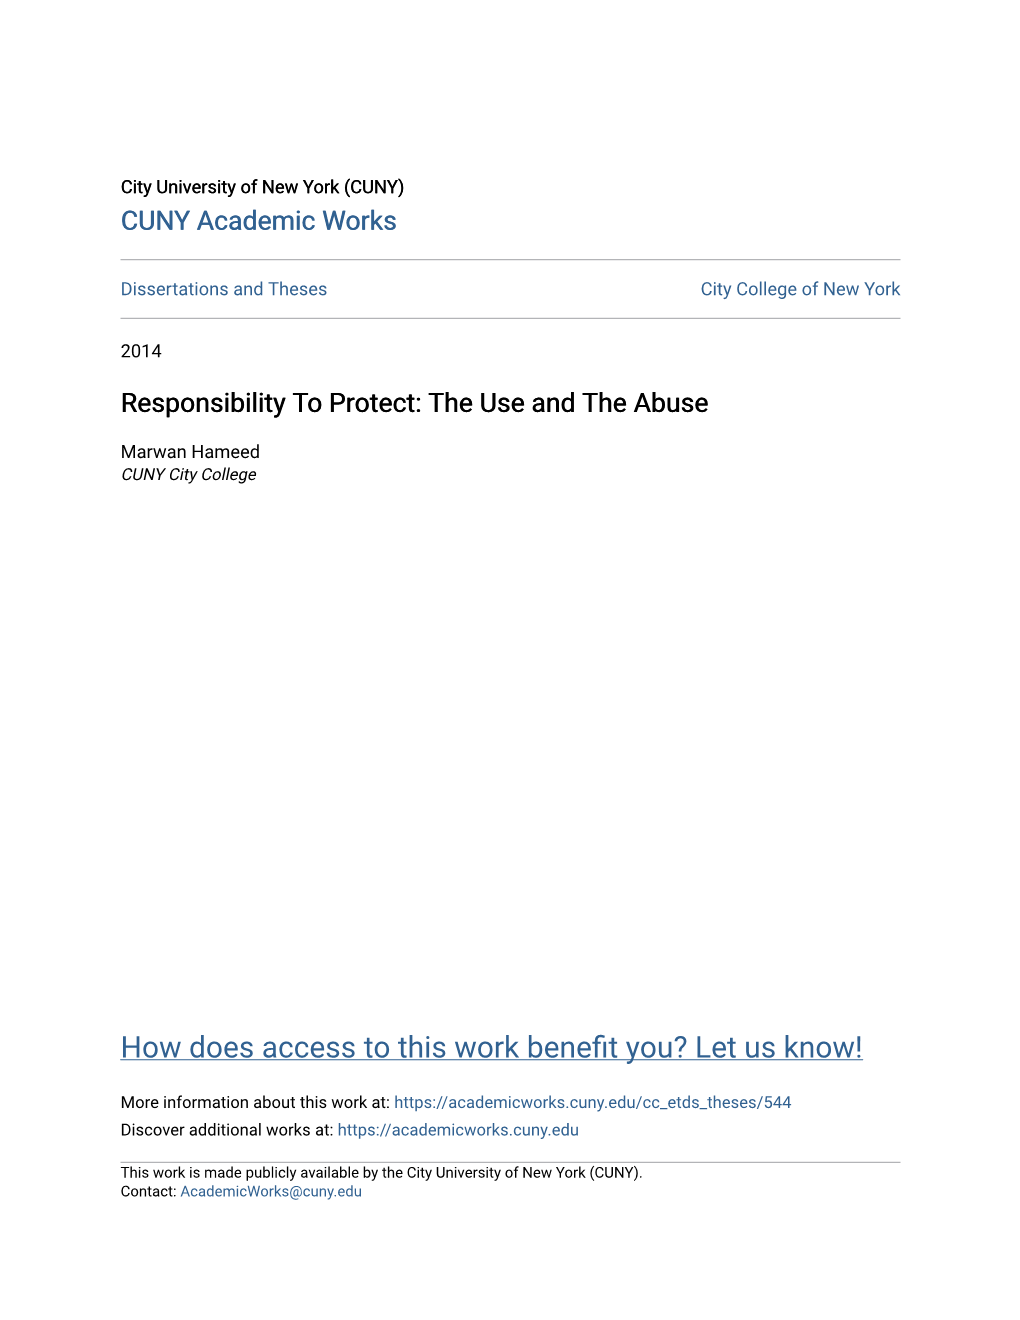 Responsibility to Protect: the Use and the Abuse